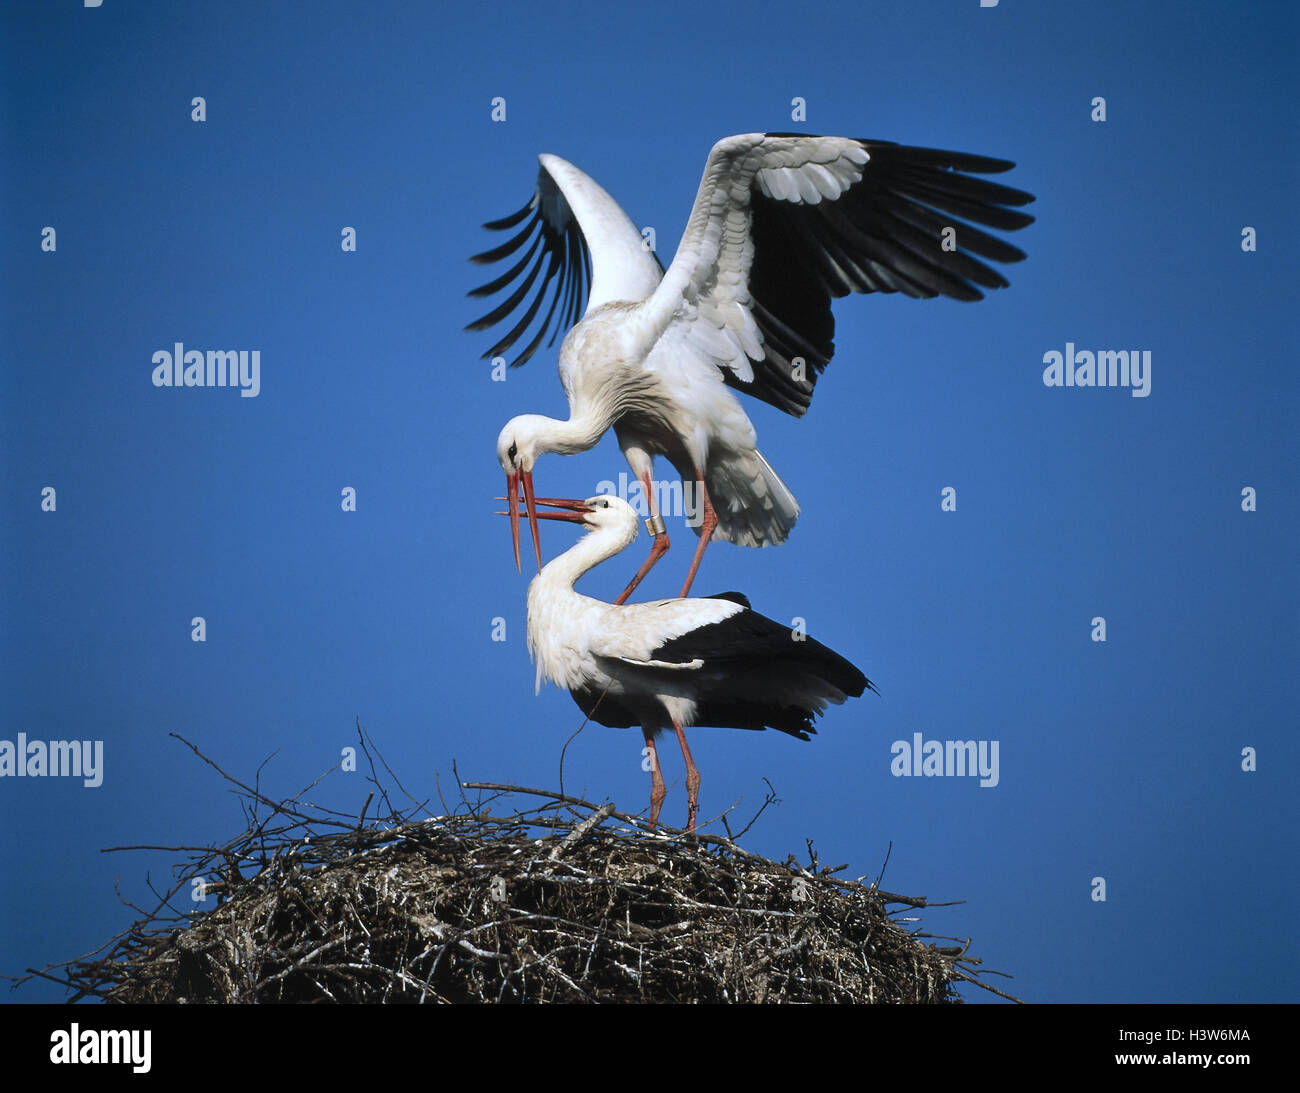 White storks, Ciconia ciconia, mating animals, birds, storks, stork, Ciconiidae, Horst, nest, nesting place, Stelzvögel, storks, white stork, reproduction, little man, female, Storchenpaar, courtship displays Stock Photo